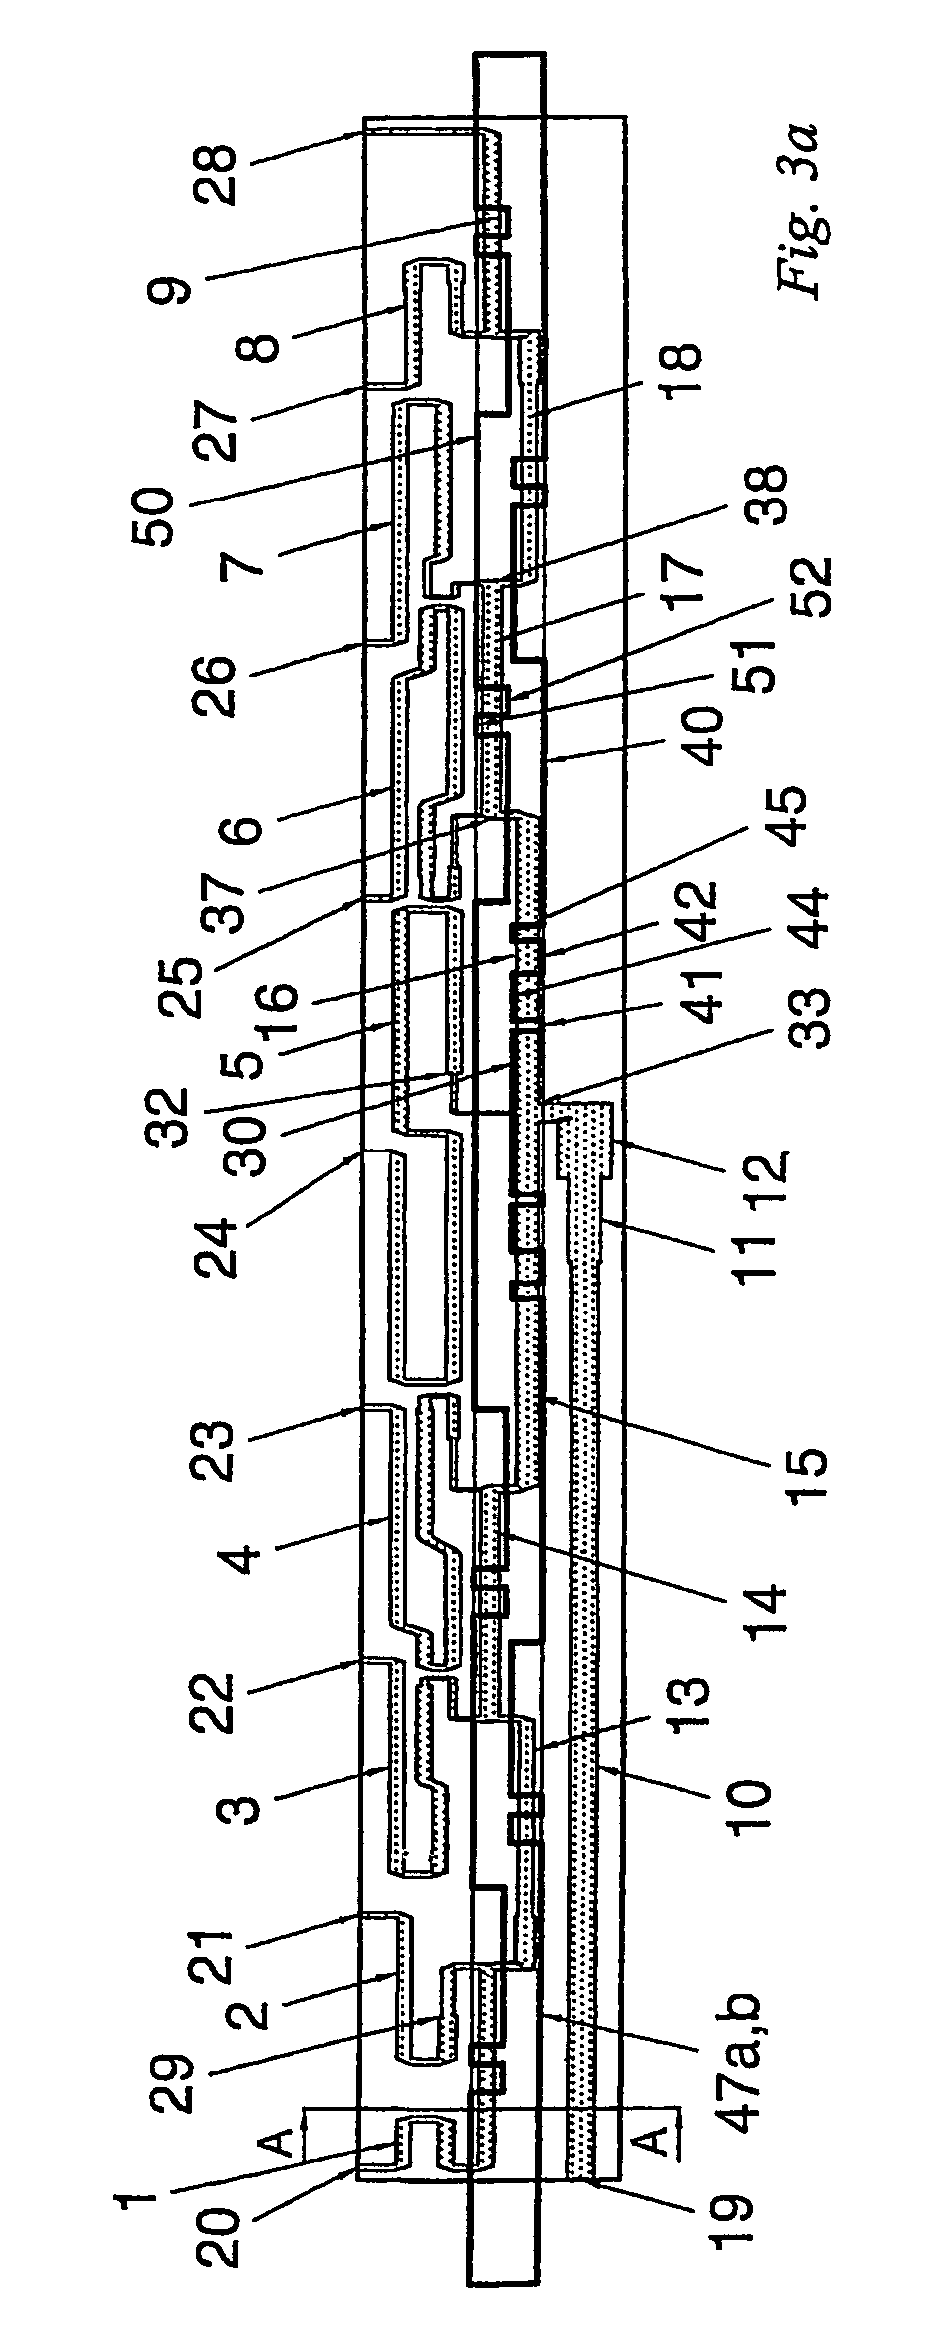 Adjustable antenna feed network with integrated phase shifter